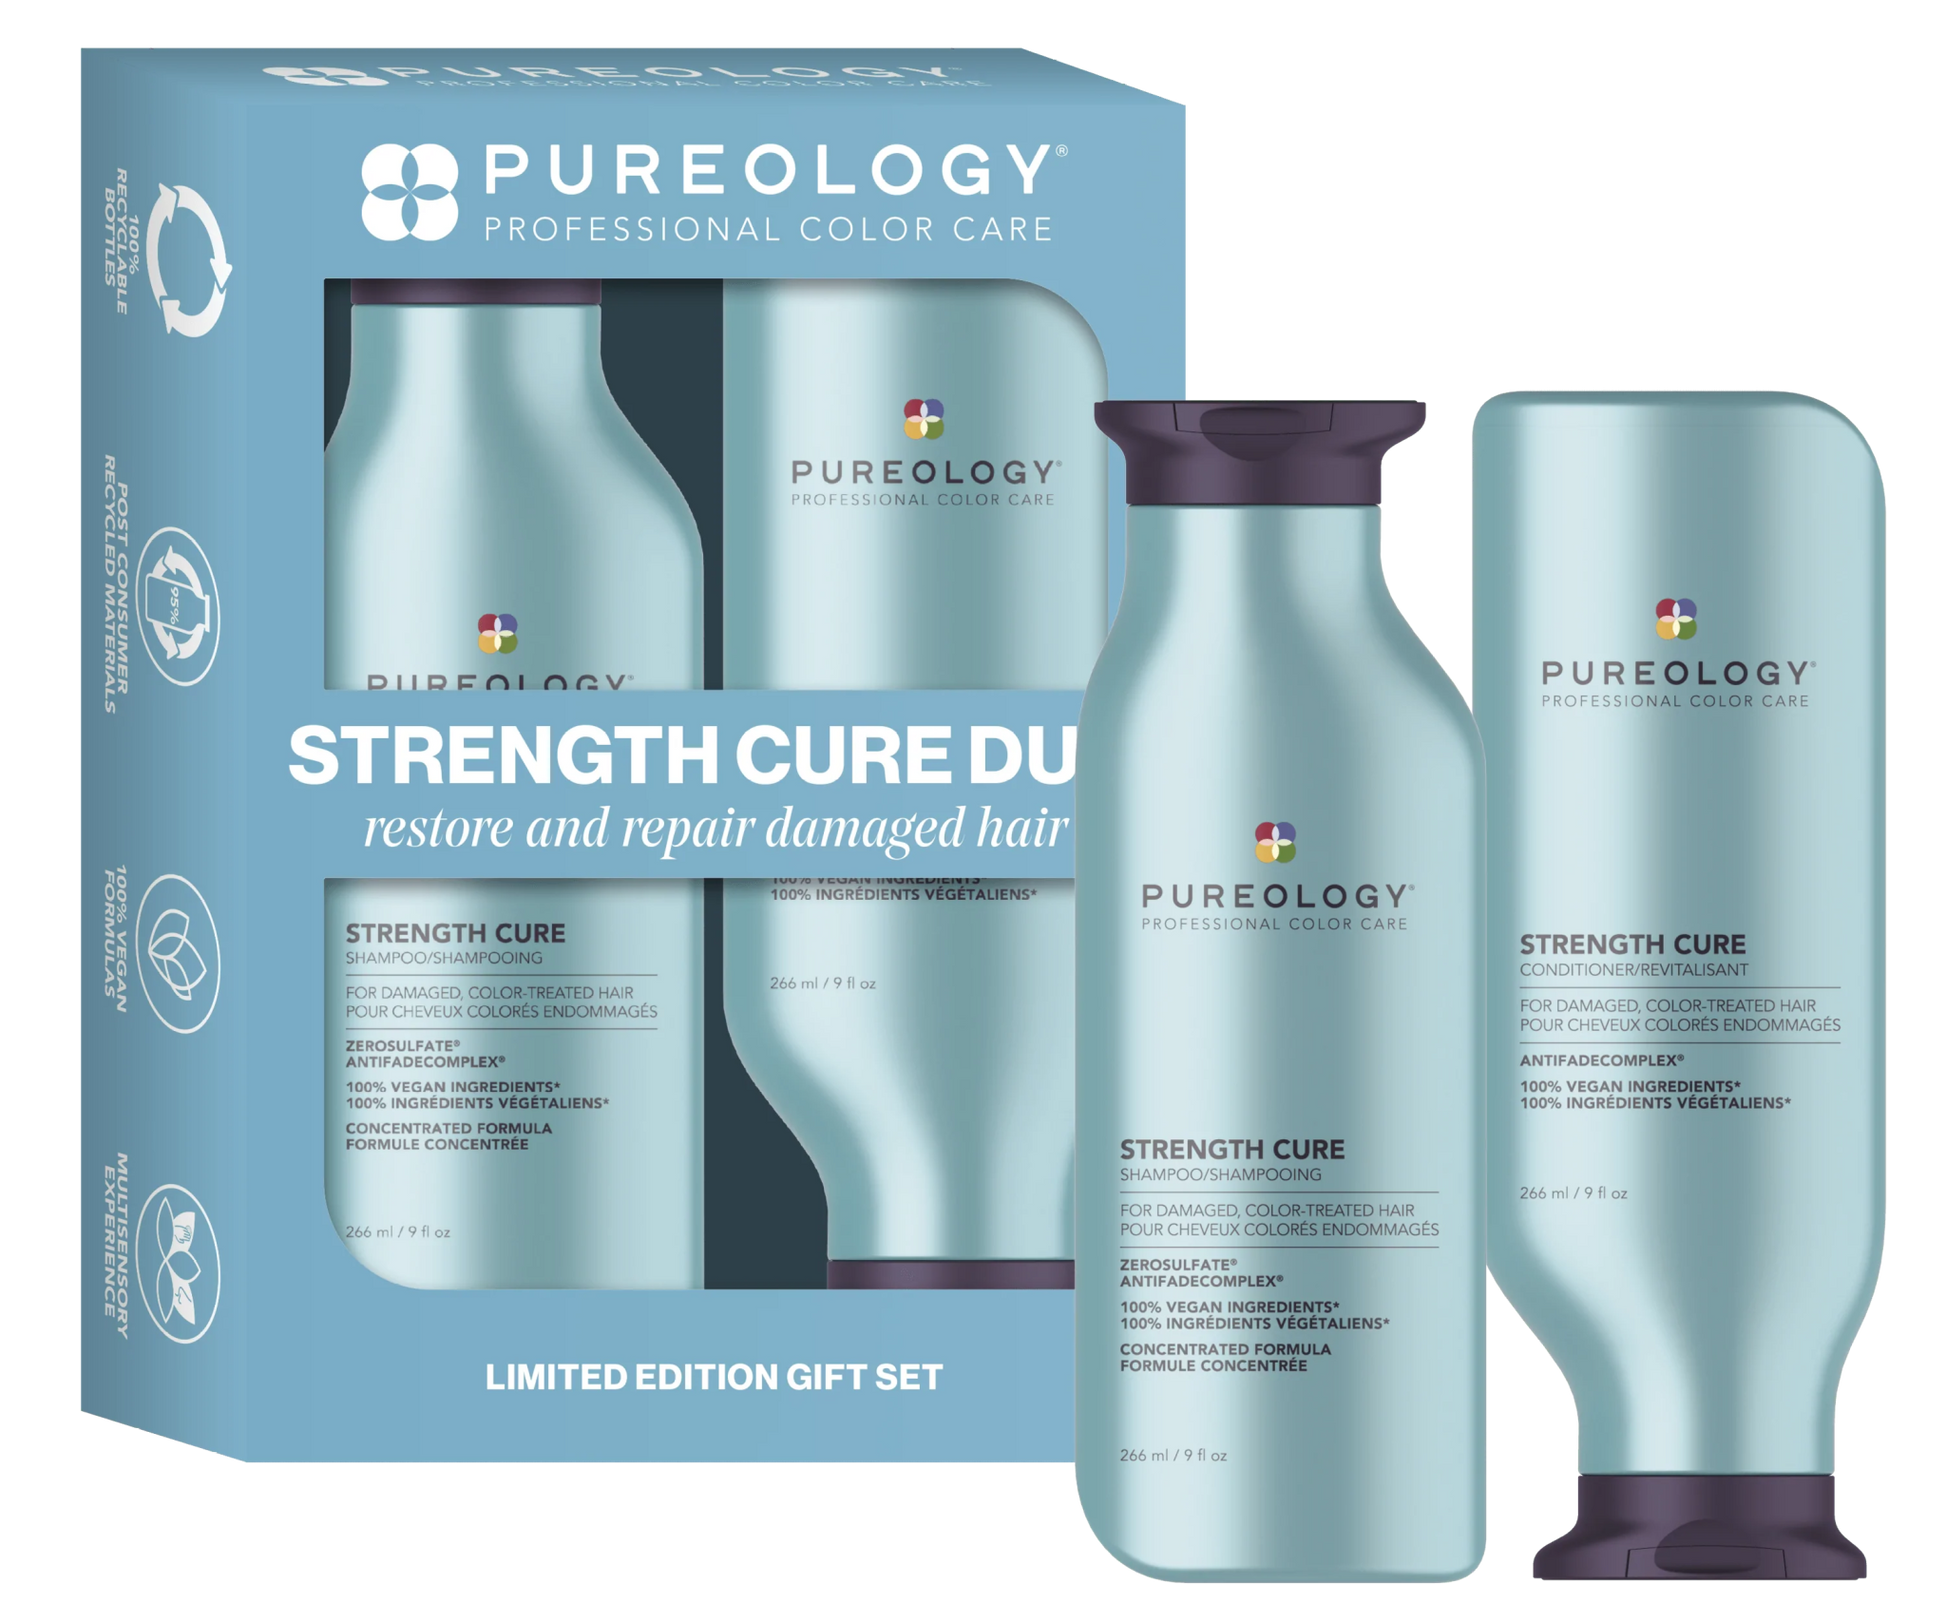 Pureology Strength Cure Duo Pack - shelley and co